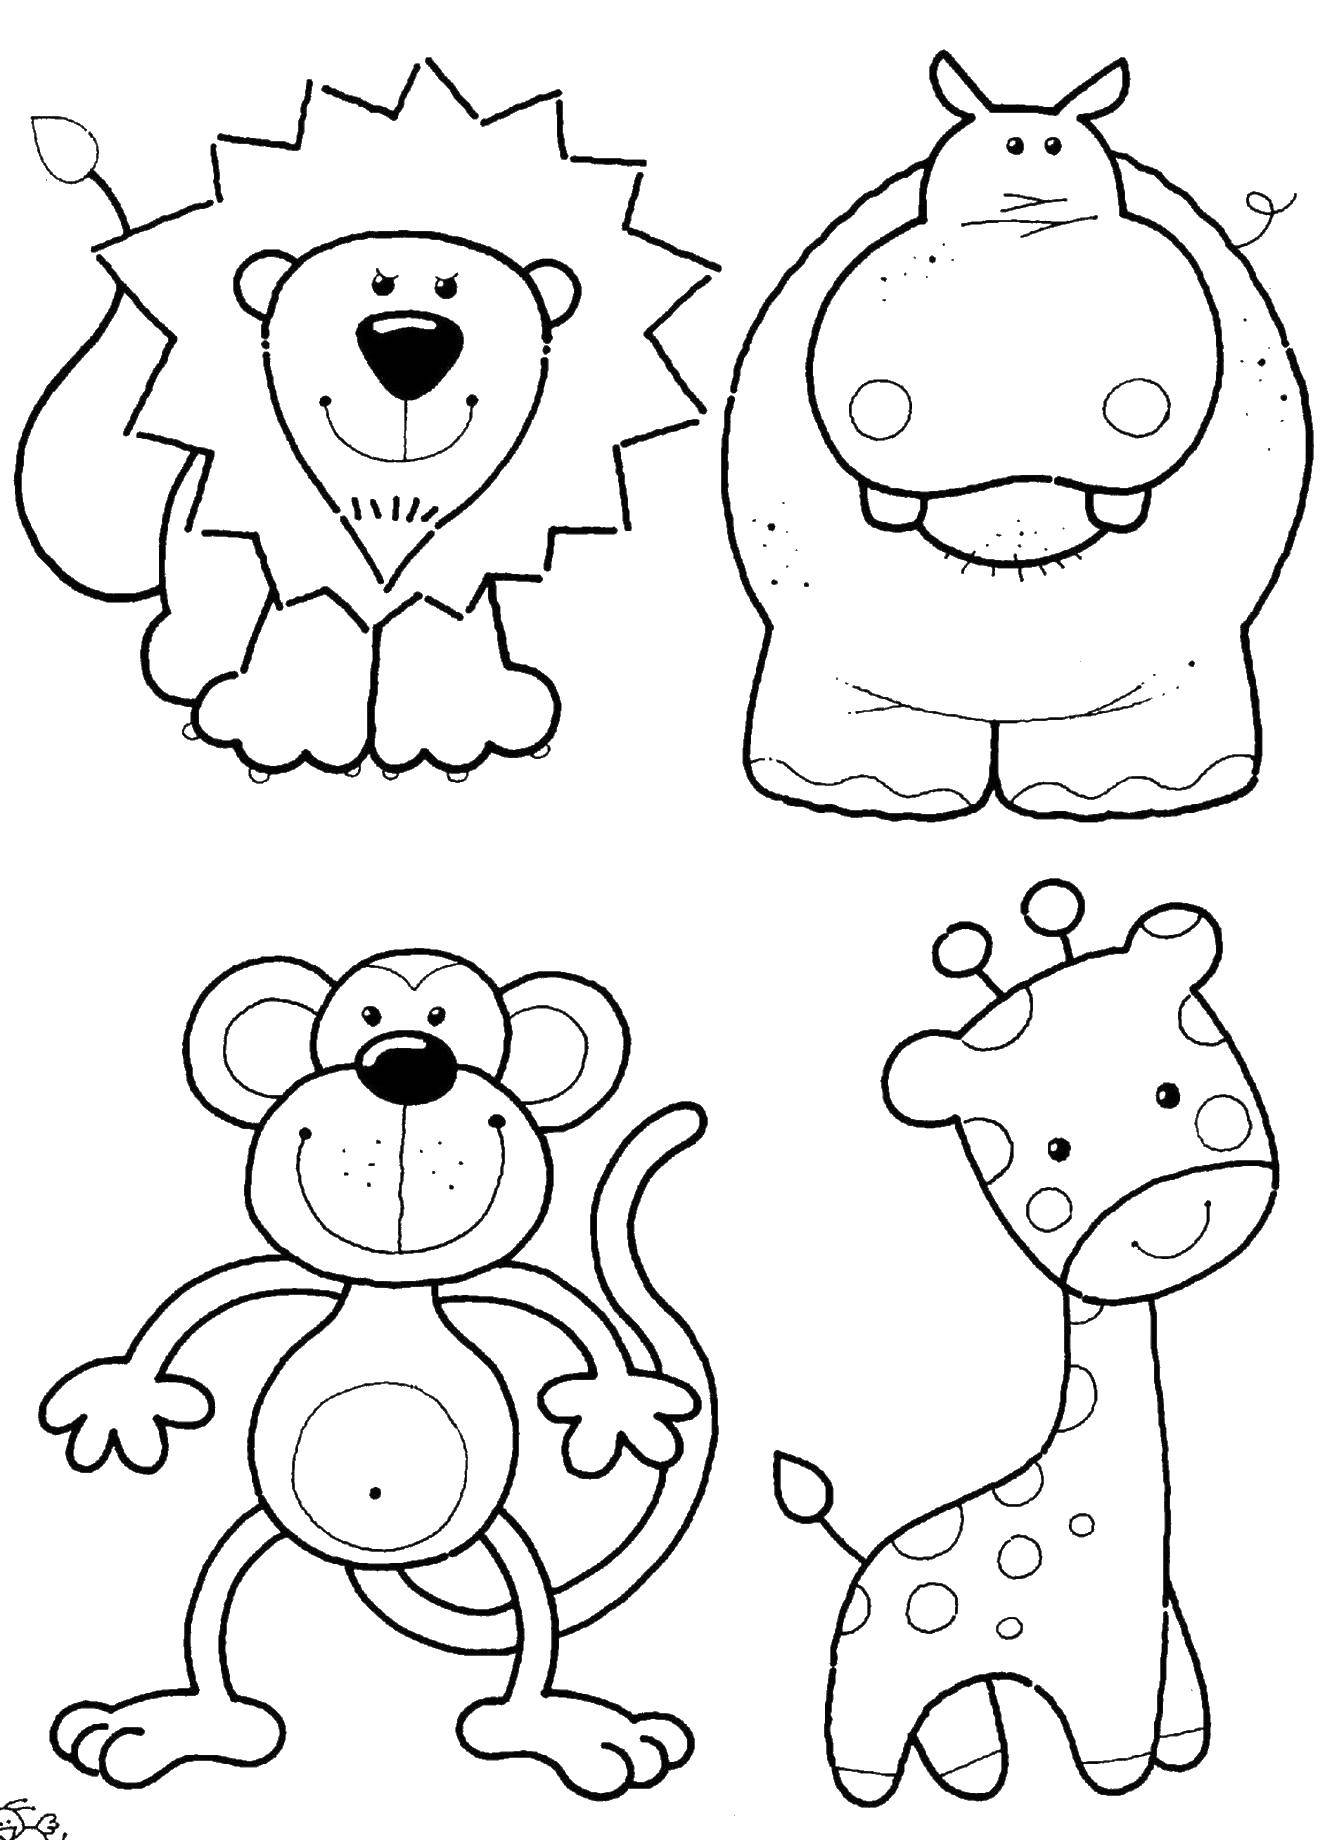 Coloring Animals. Category Animals. Tags:  animals, lion, Hippo, monkey, giraffe.